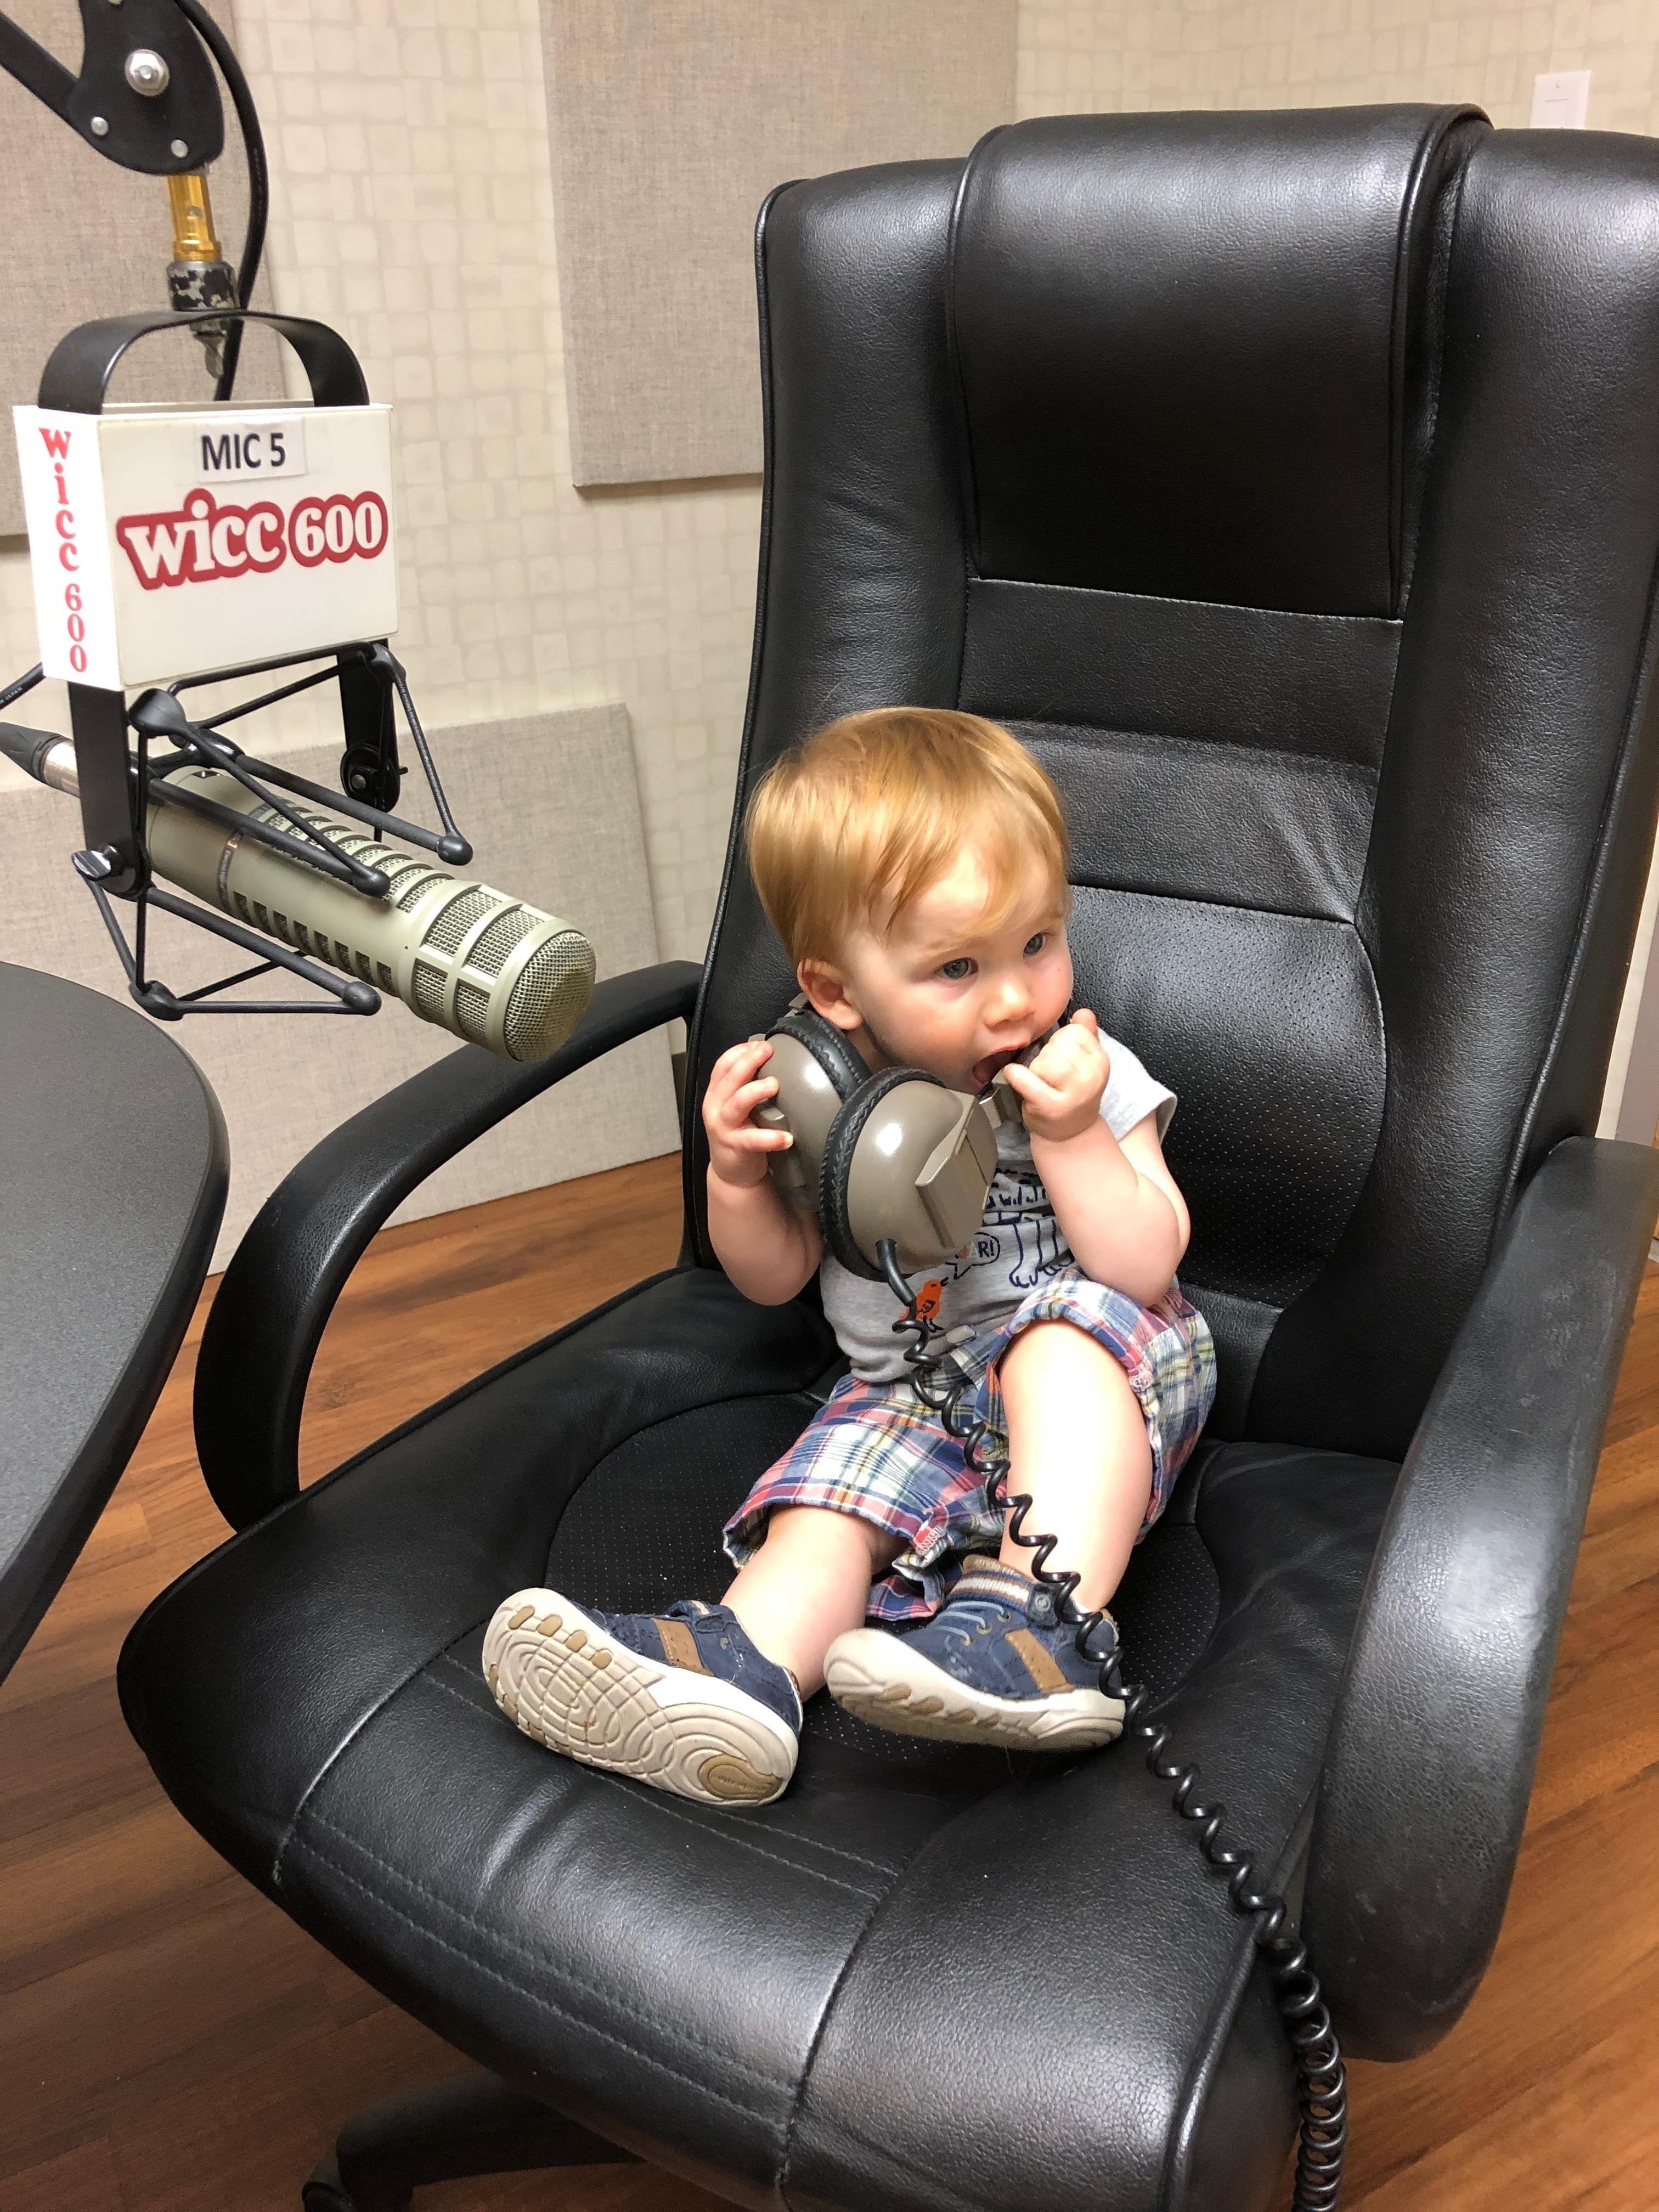 Connecticut Today with Paul Pacelli: The Kid’s First Day in Radio